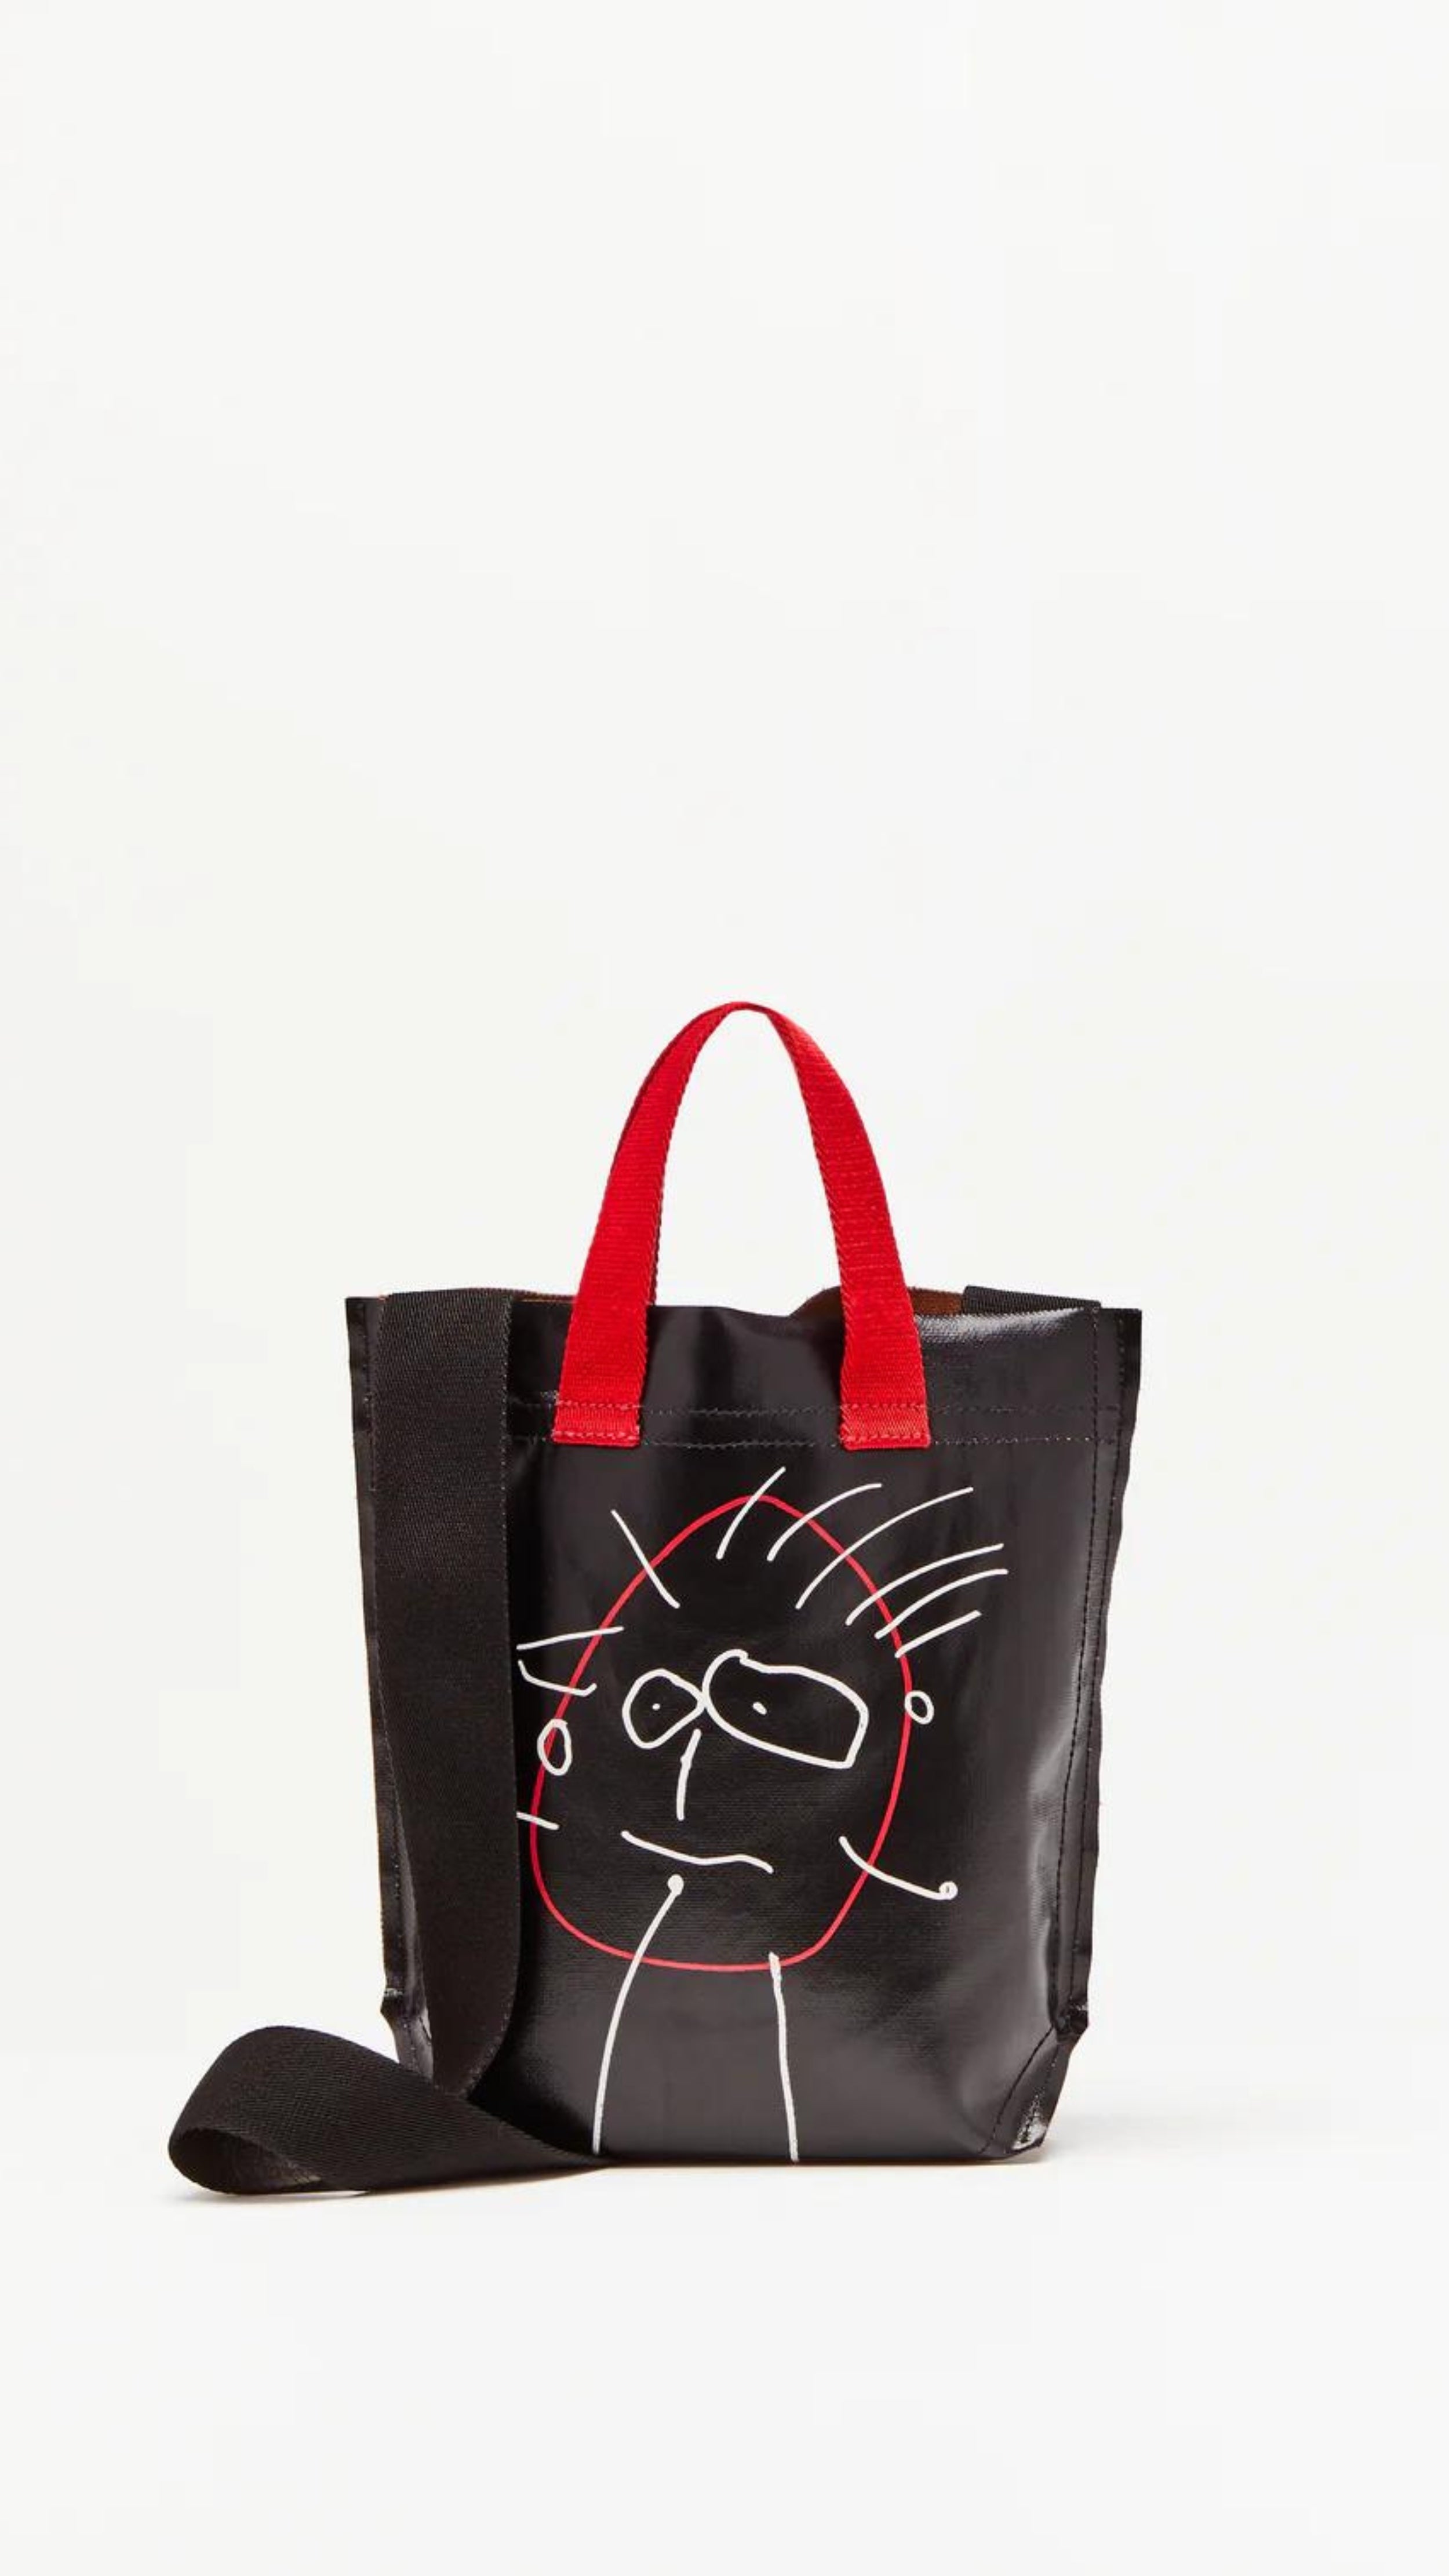 Plan C Pili and Bianca Black Mini Shopper. Coated canvas mini shopper style bag with whimsical drawings on either side. Completed with a red handle strap and a long black strap. Shown from front view.